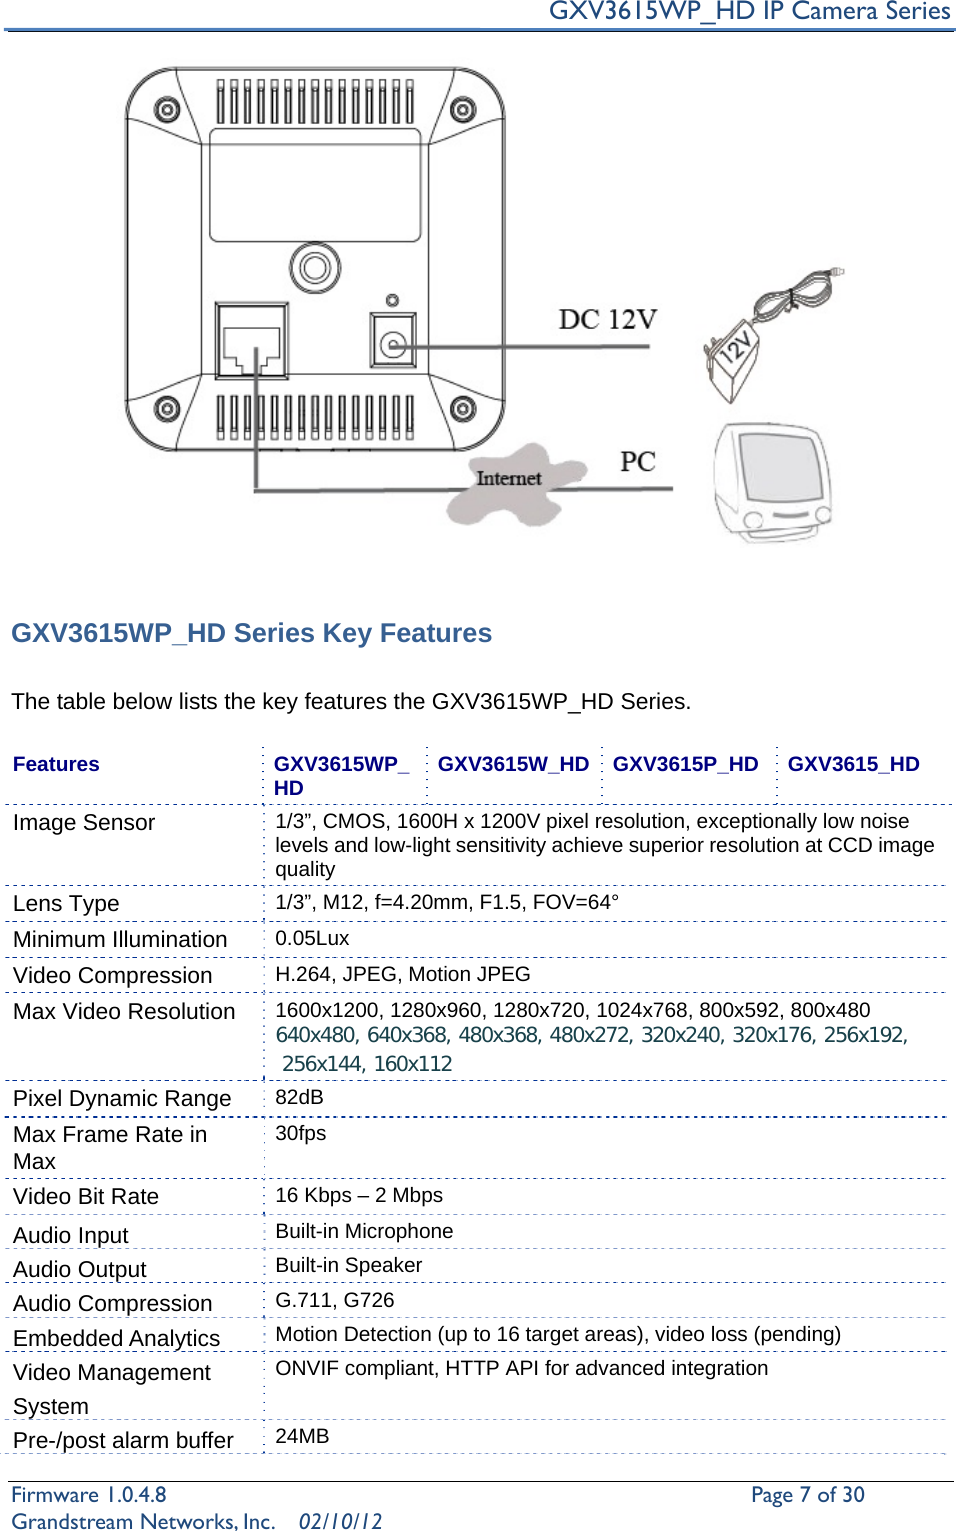     GXV3615WP_HD IP Camera Series Firmware 1.0.4.8                                                   Page 7 of 30         Grandstream Networks, Inc.  02/10/12     GXV3615WP_HD Series Key Features    The table below lists the key features the GXV3615WP_HD Series.  Features  GXV3615WP_HD  GXV3615W_HD GXV3615P_HD GXV3615_HD Image Sensor 1/3”, CMOS, 1600H x 1200V pixel resolution, exceptionally low noise levels and low-light sensitivity achieve superior resolution at CCD image quality  Lens Type 1/3”, M12, f=4.20mm, F1.5, FOV=64° Minimum Illumination 0.05Lux Video Compression H.264, JPEG, Motion JPEG Max Video Resolution  1600x1200, 1280x960, 1280x720, 1024x768, 800x592, 800x480 640x480, 640x368, 480x368, 480x272, 320x240, 320x176, 256x192,  256x144, 160x112 Pixel Dynamic Range  82dB Max Frame Rate in Max 30fps Video Bit Rate  16 Kbps – 2 Mbps Audio Input Built-in Microphone Audio Output Built-in Speaker Audio Compression G.711, G726 Embedded Analytics   Motion Detection (up to 16 target areas), video loss (pending)   Video Management System ONVIF compliant, HTTP API for advanced integration Pre-/post alarm buffer   24MB  